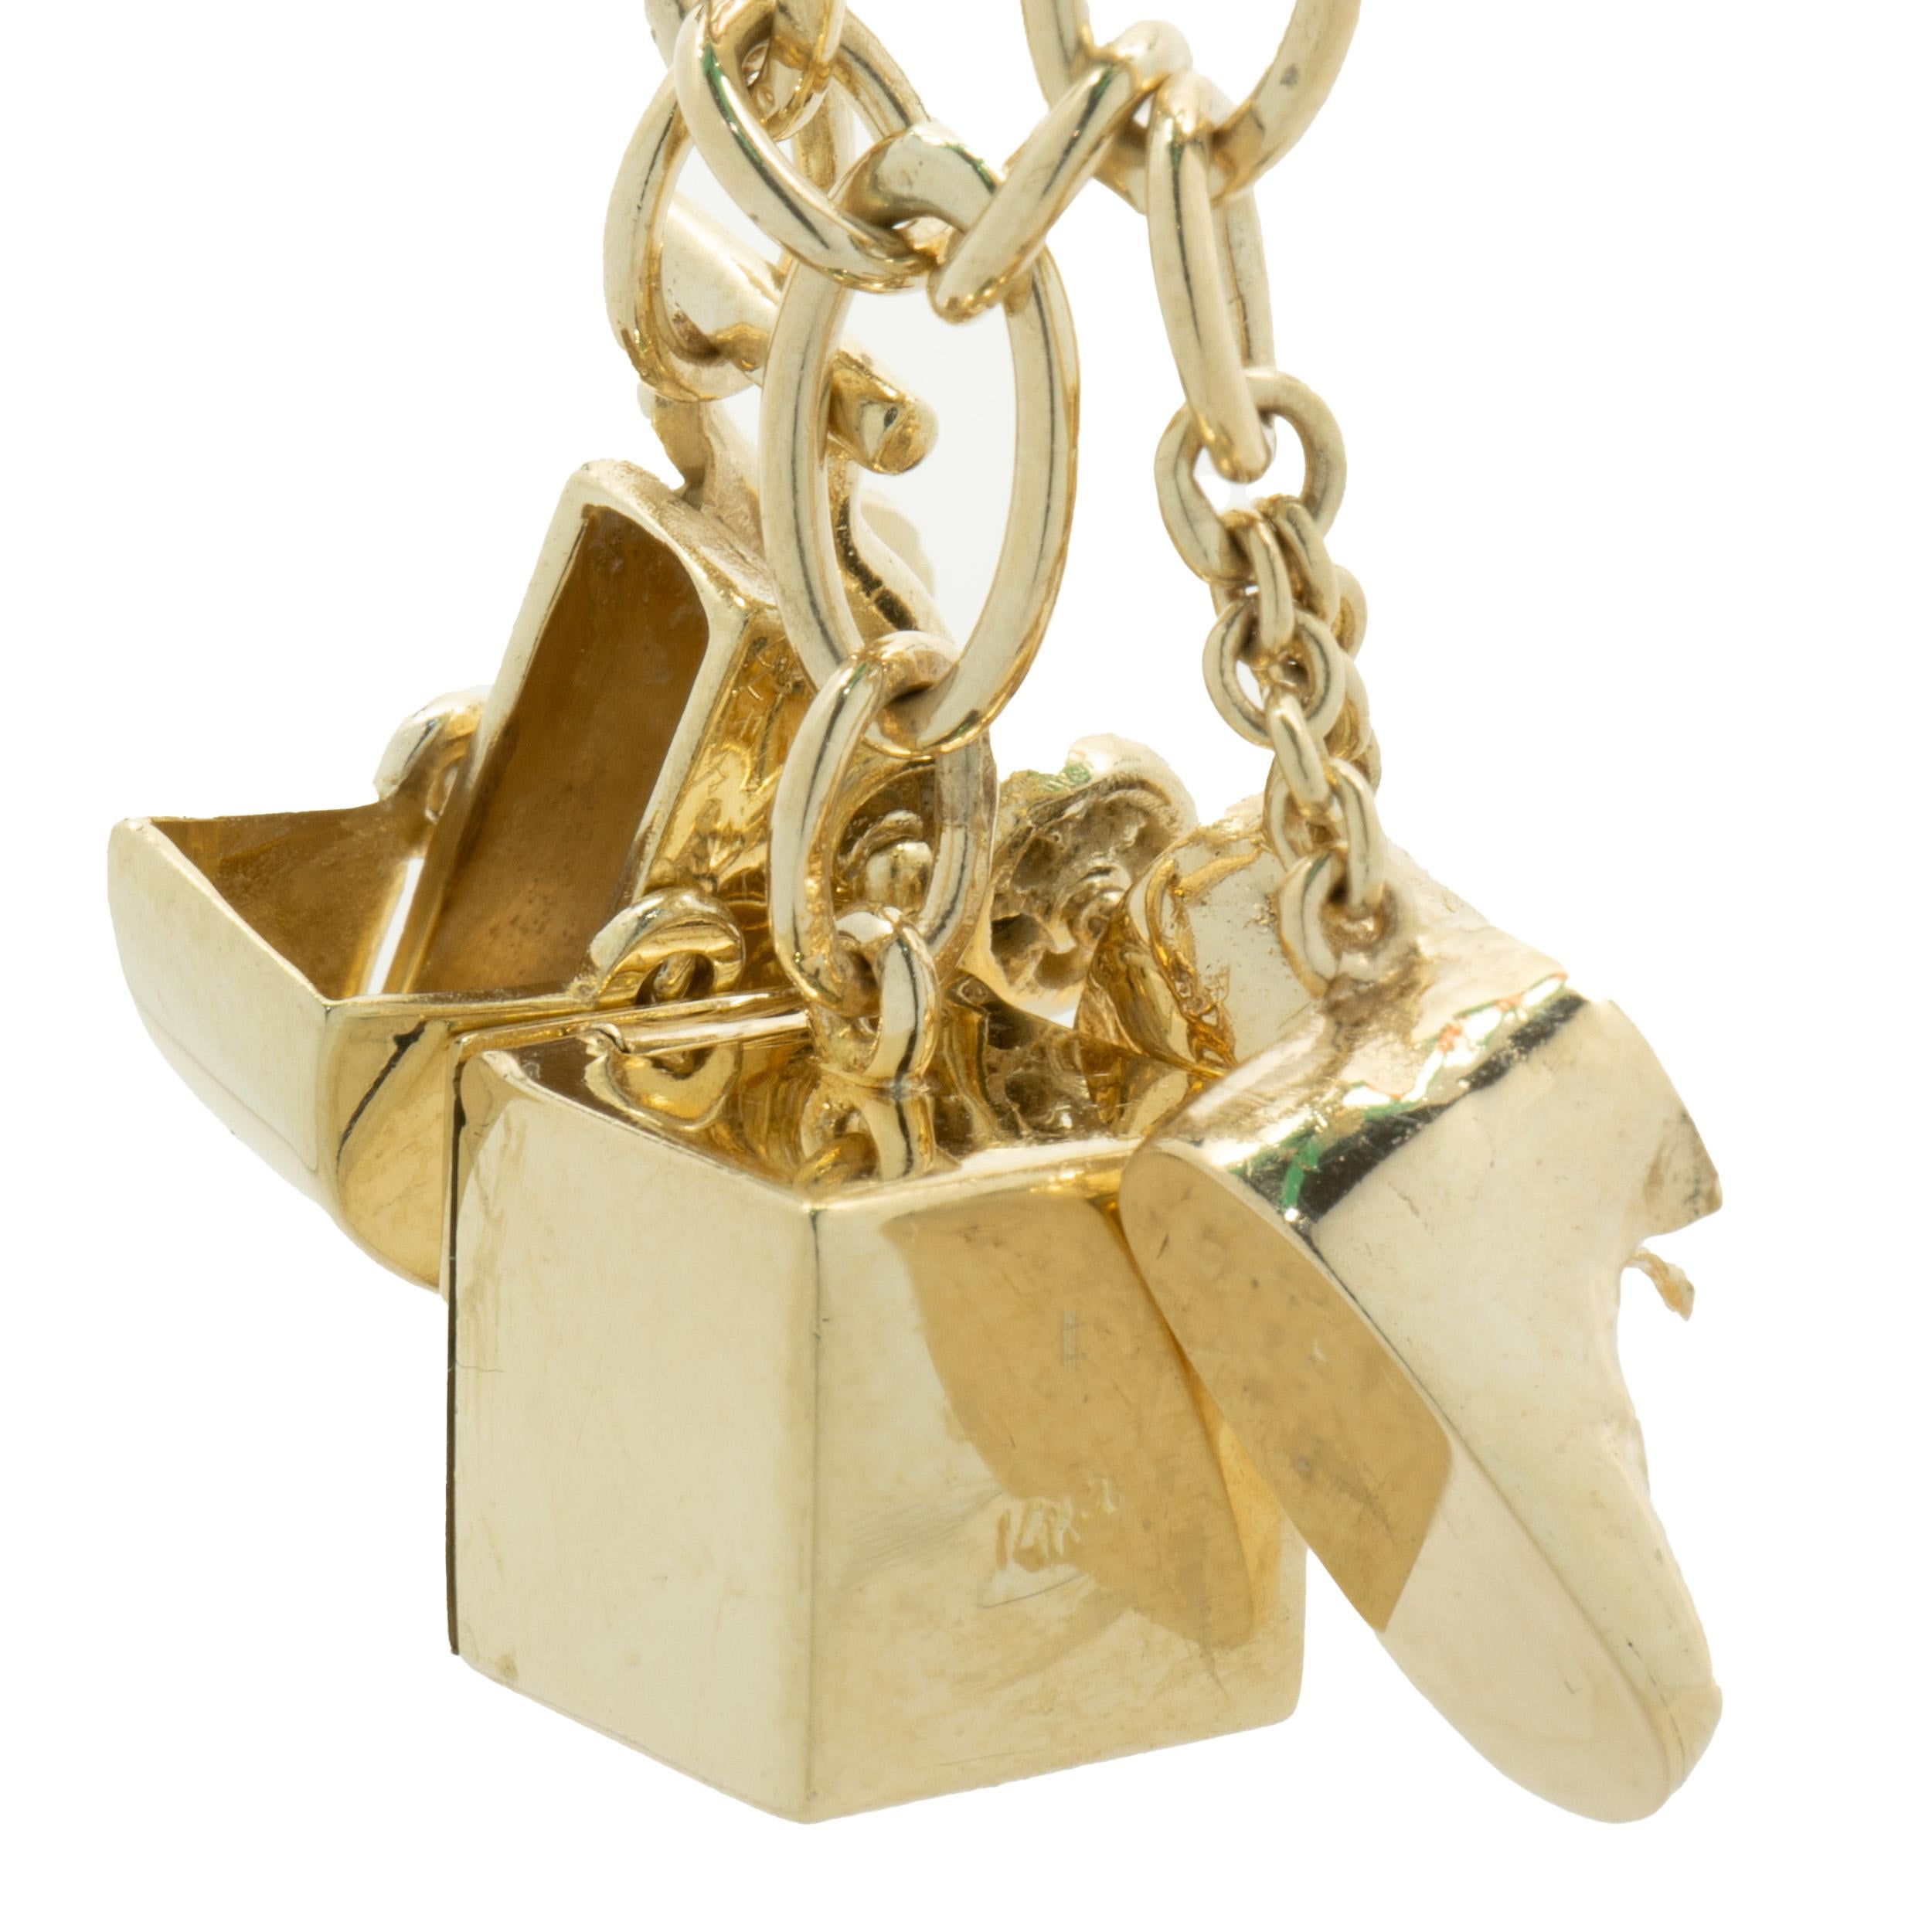 Designer: Tiffany & Co. 
Material: 14K yellow gold
Dimensions: bracelet measures 7.5-inches
Weight: 16.30 grams
